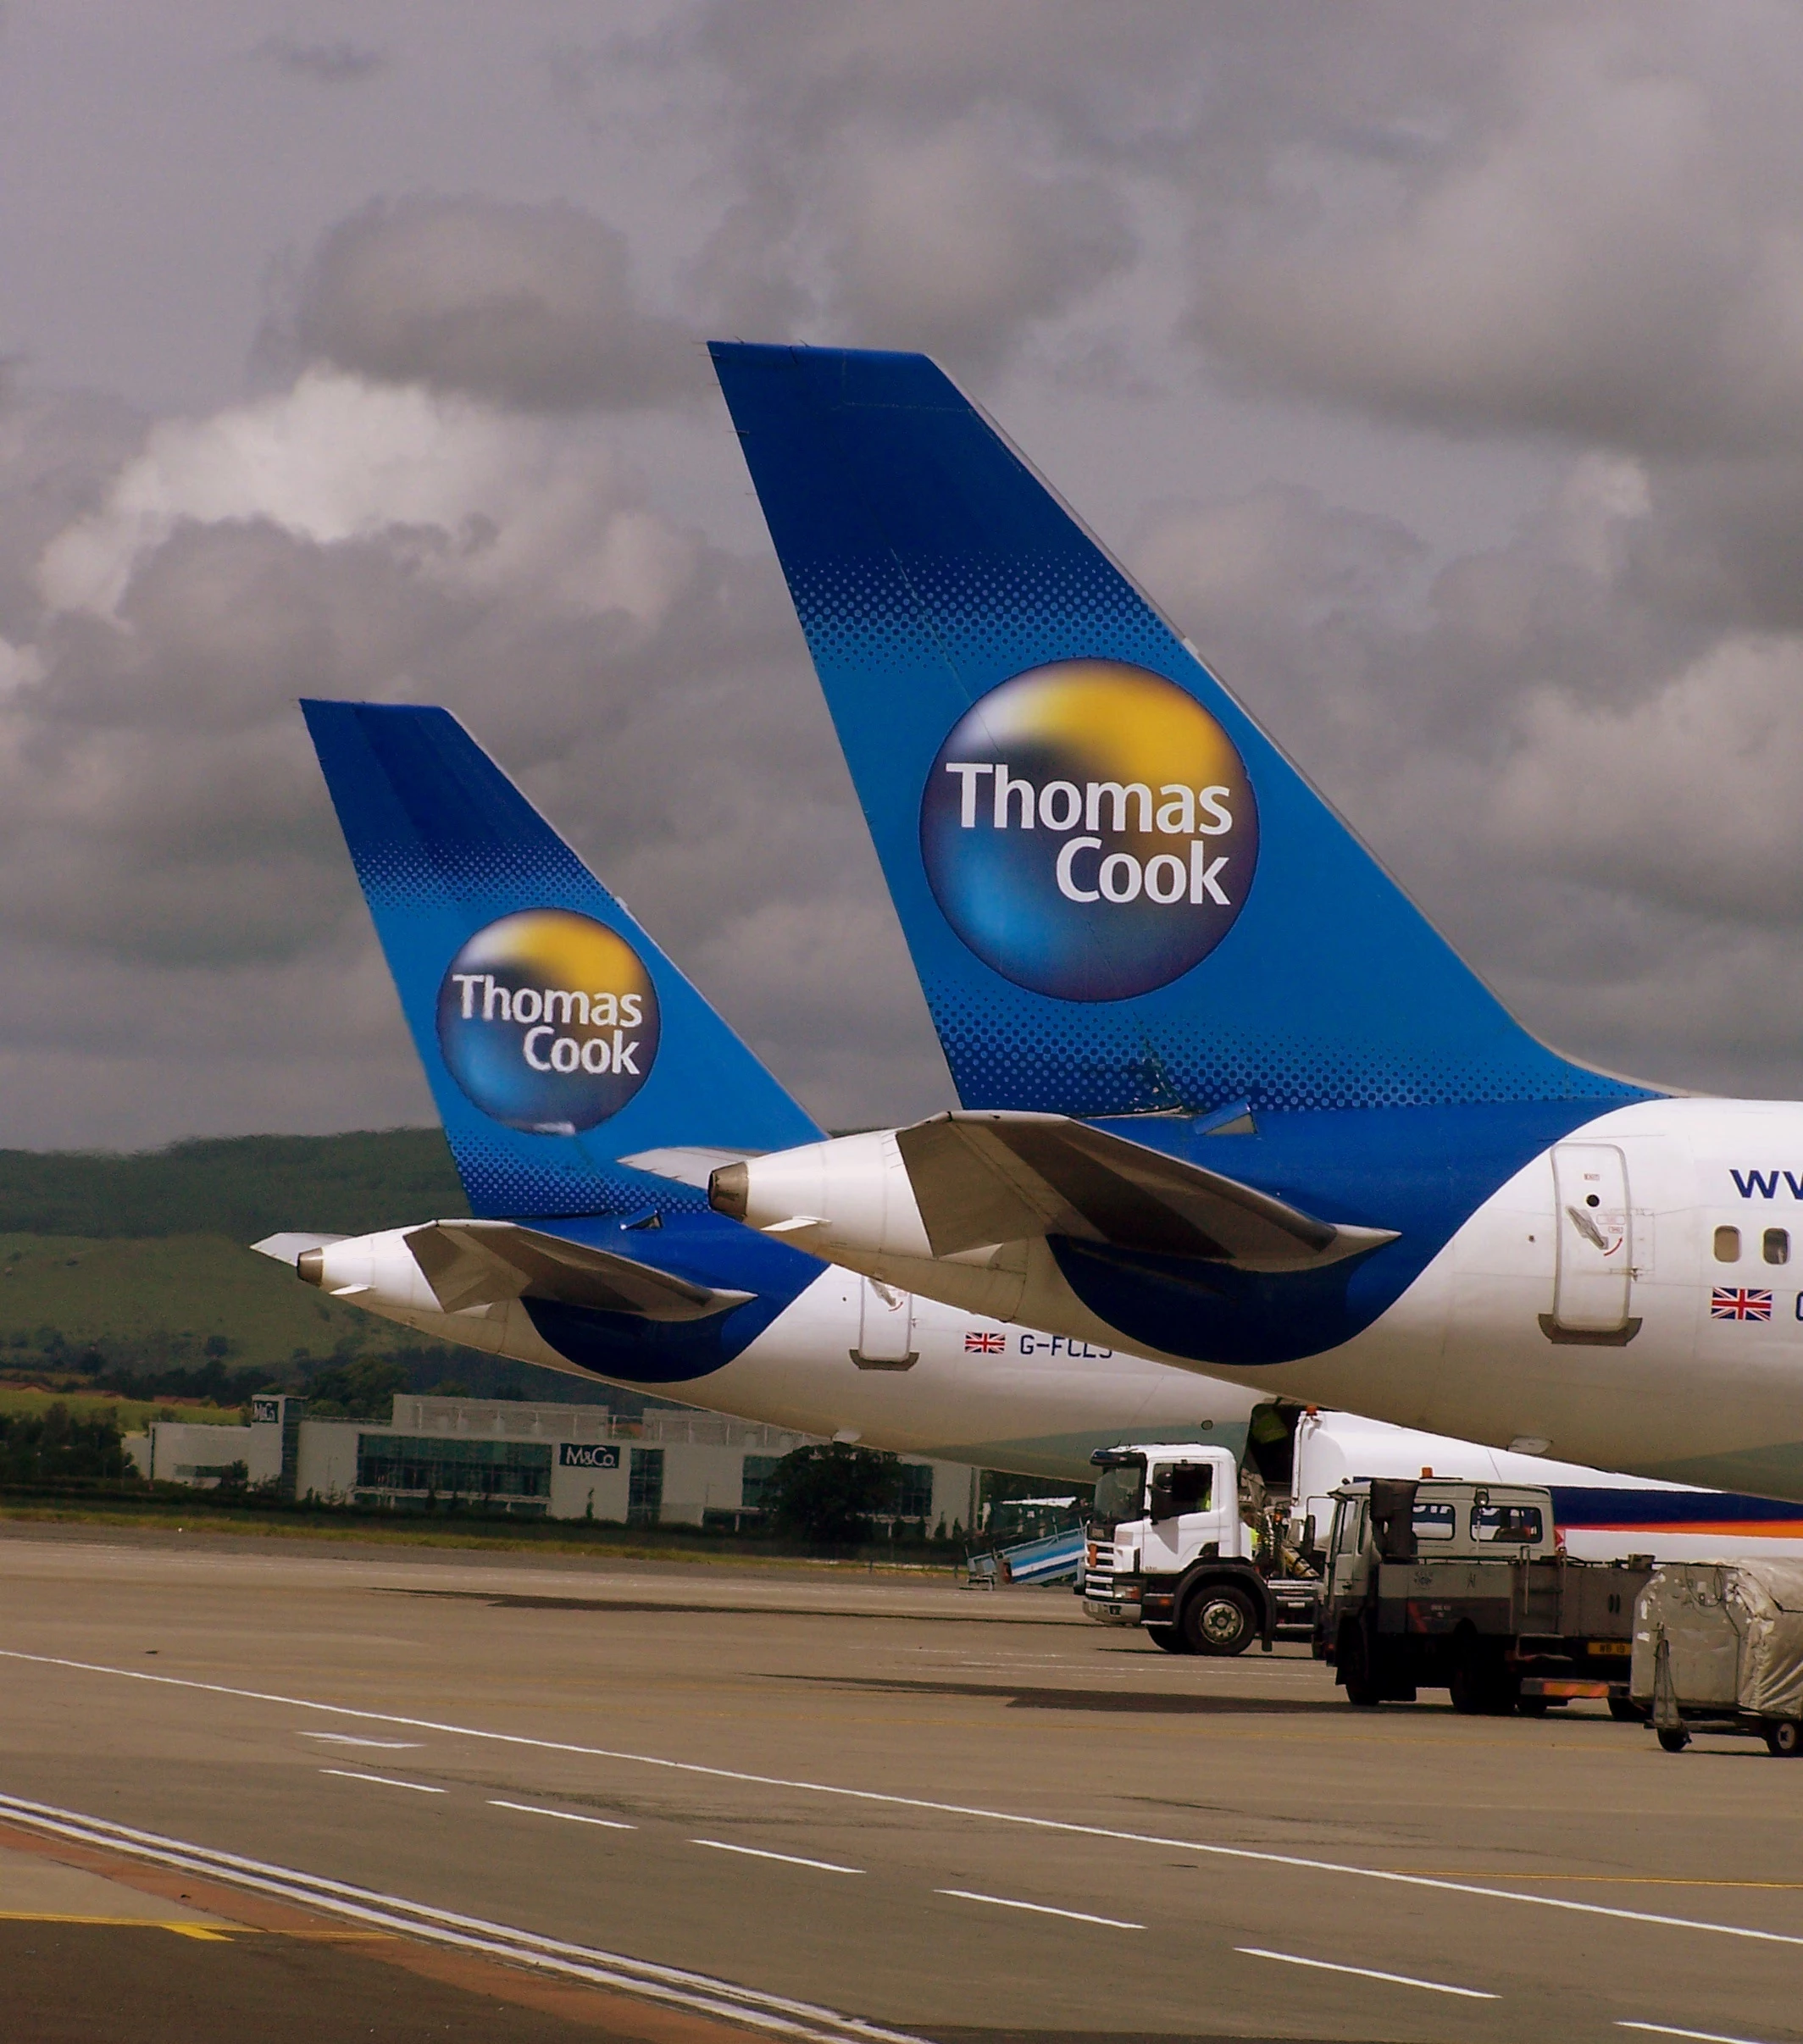 Thomas Cook tails